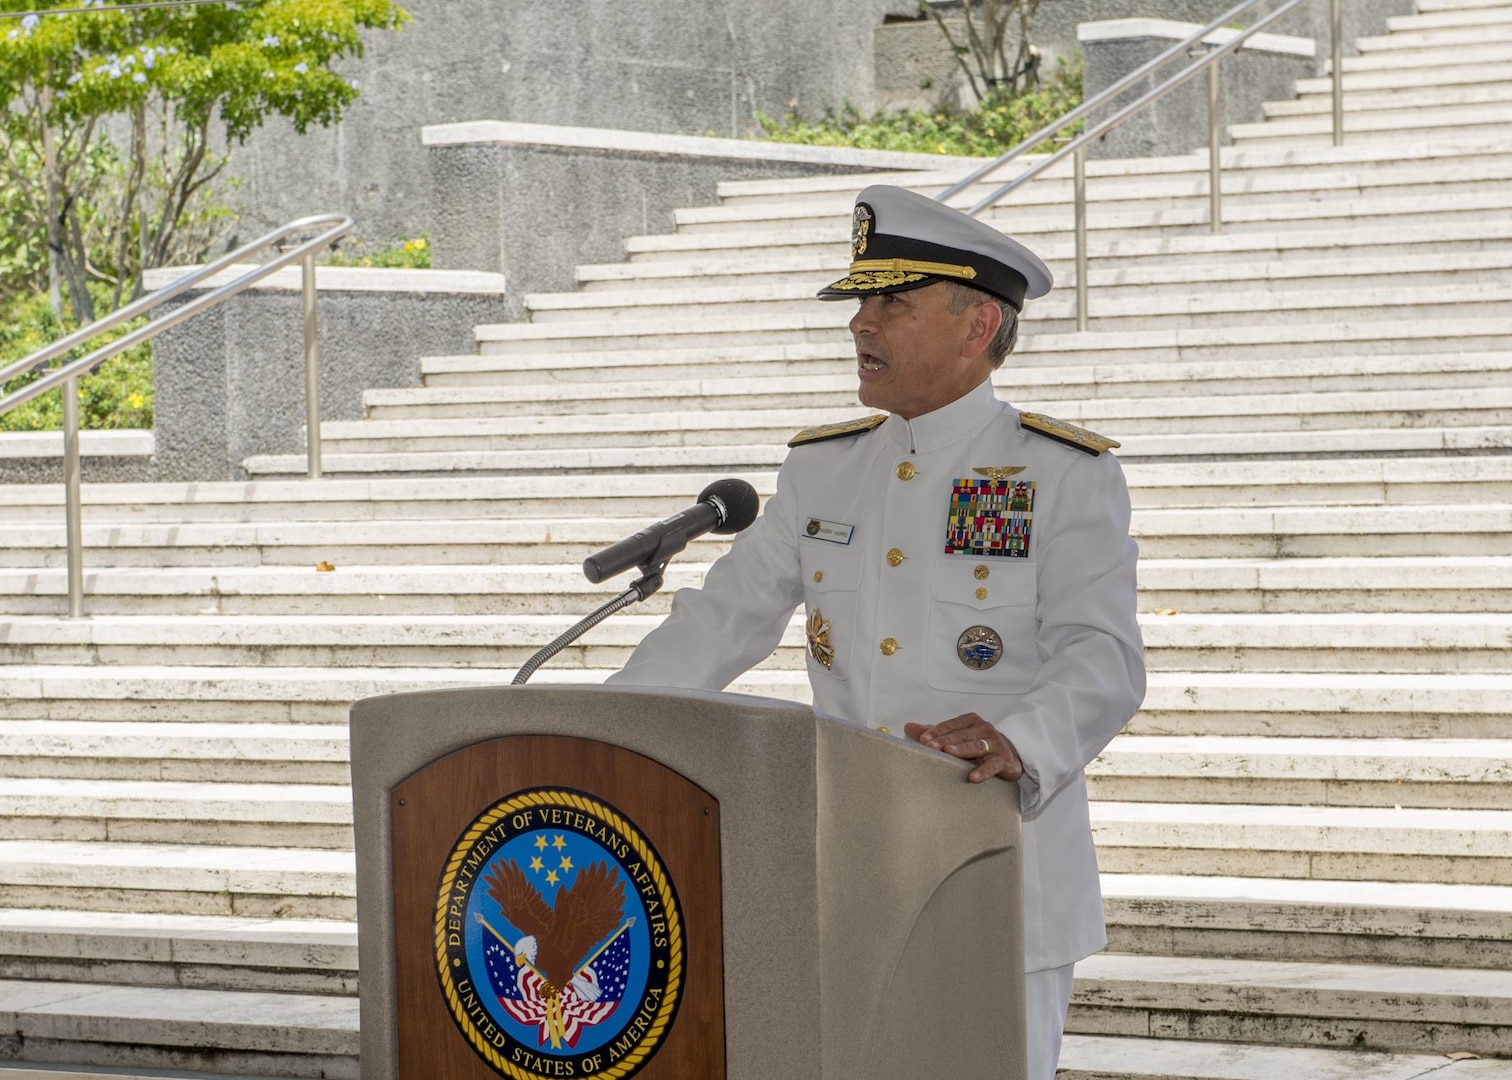 HONOLULU (June 25, 2017)—Adm. Harry Harris, commander of U.S. Pacific Command, gives his remarks during the 67th annual Korean War Memorial Ceremony at the National Memorial Cemetery of the Pacific. Active-duty military, decorated veterans, government officials, community and family members gathered during the ceremony to remember and honor fallen military veterans. (U.S. Navy photo by Mass Communication Specialist 2nd Class Robin W. Peak/Released)